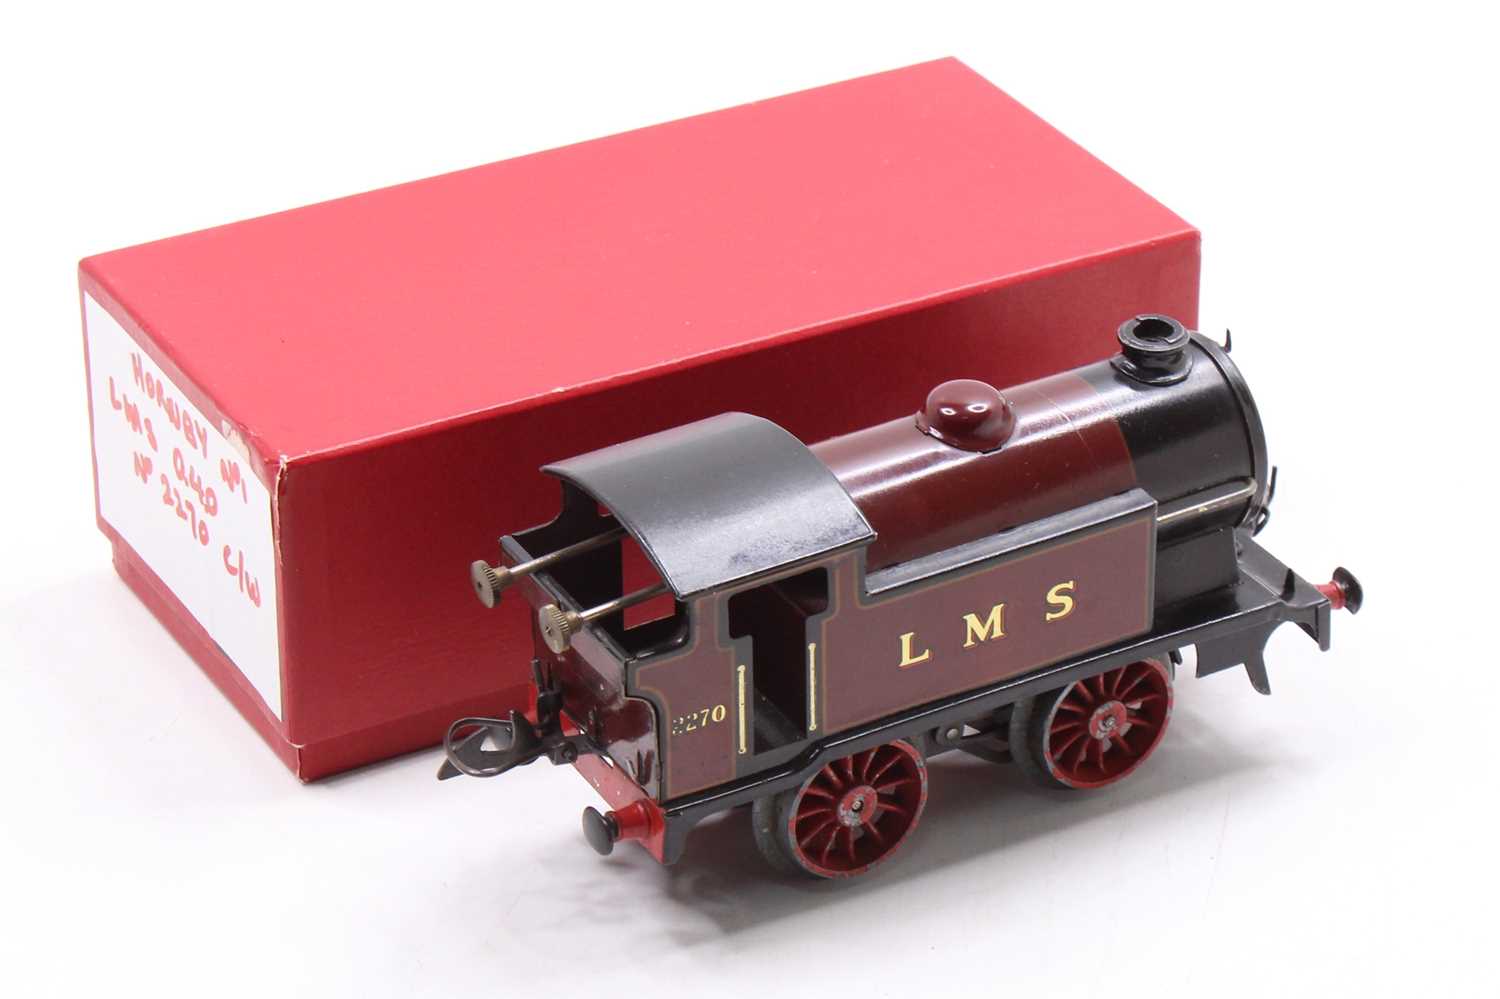 1932-6 Hornby M3 tank tin-printed loco 0-4-0 LMS 2270 red no cylinders, 12 spoke wheels, no coupling - Image 2 of 3